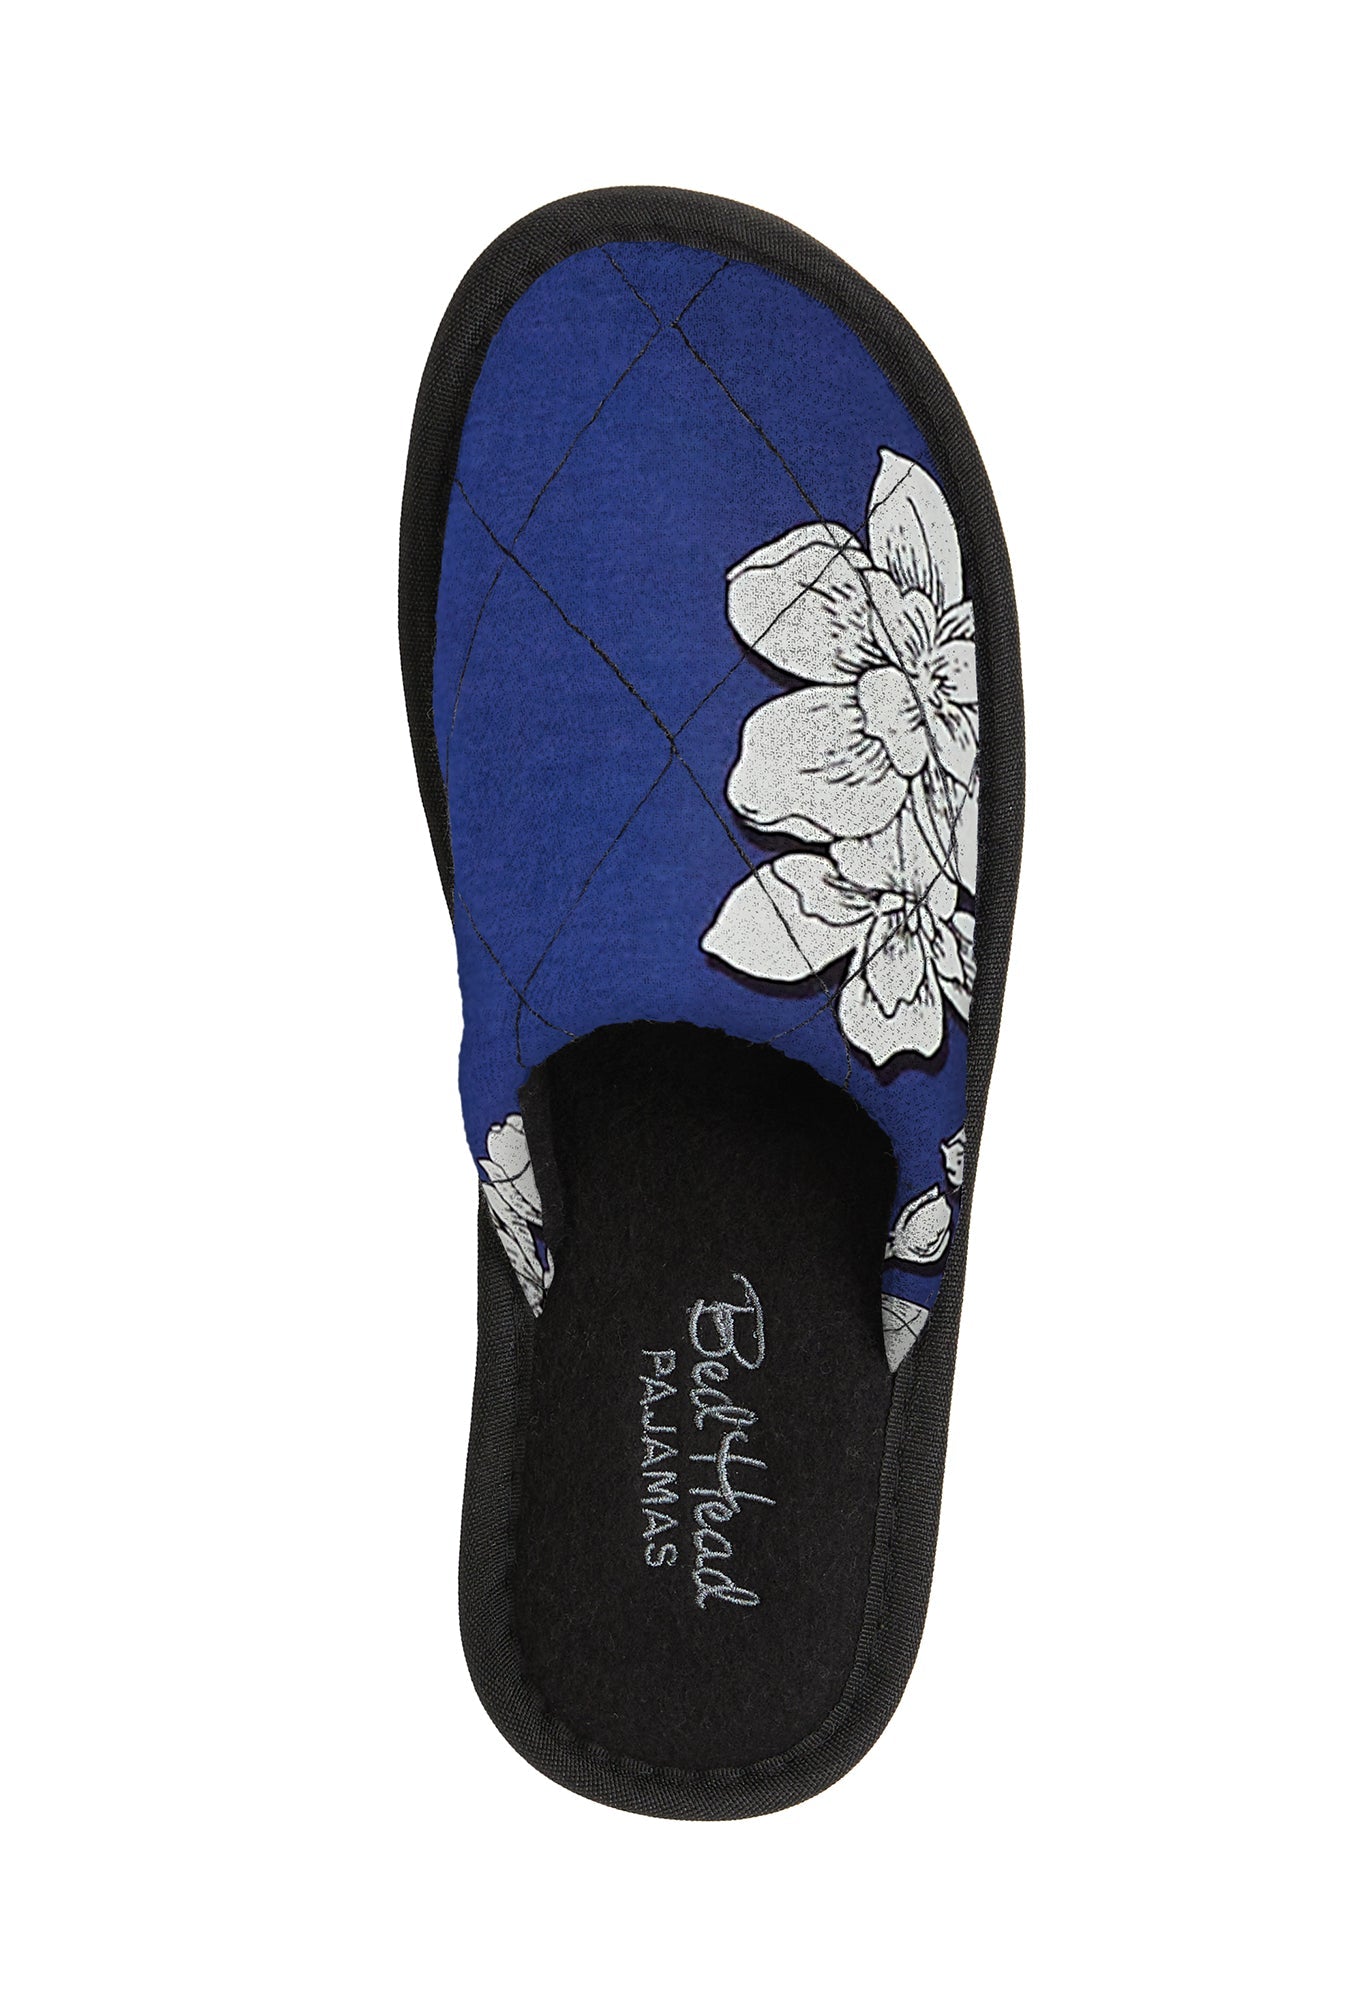 BEDHEAD NAVY SHADOW BLOSSOM FRENCH TERRY LINED SLIPPER